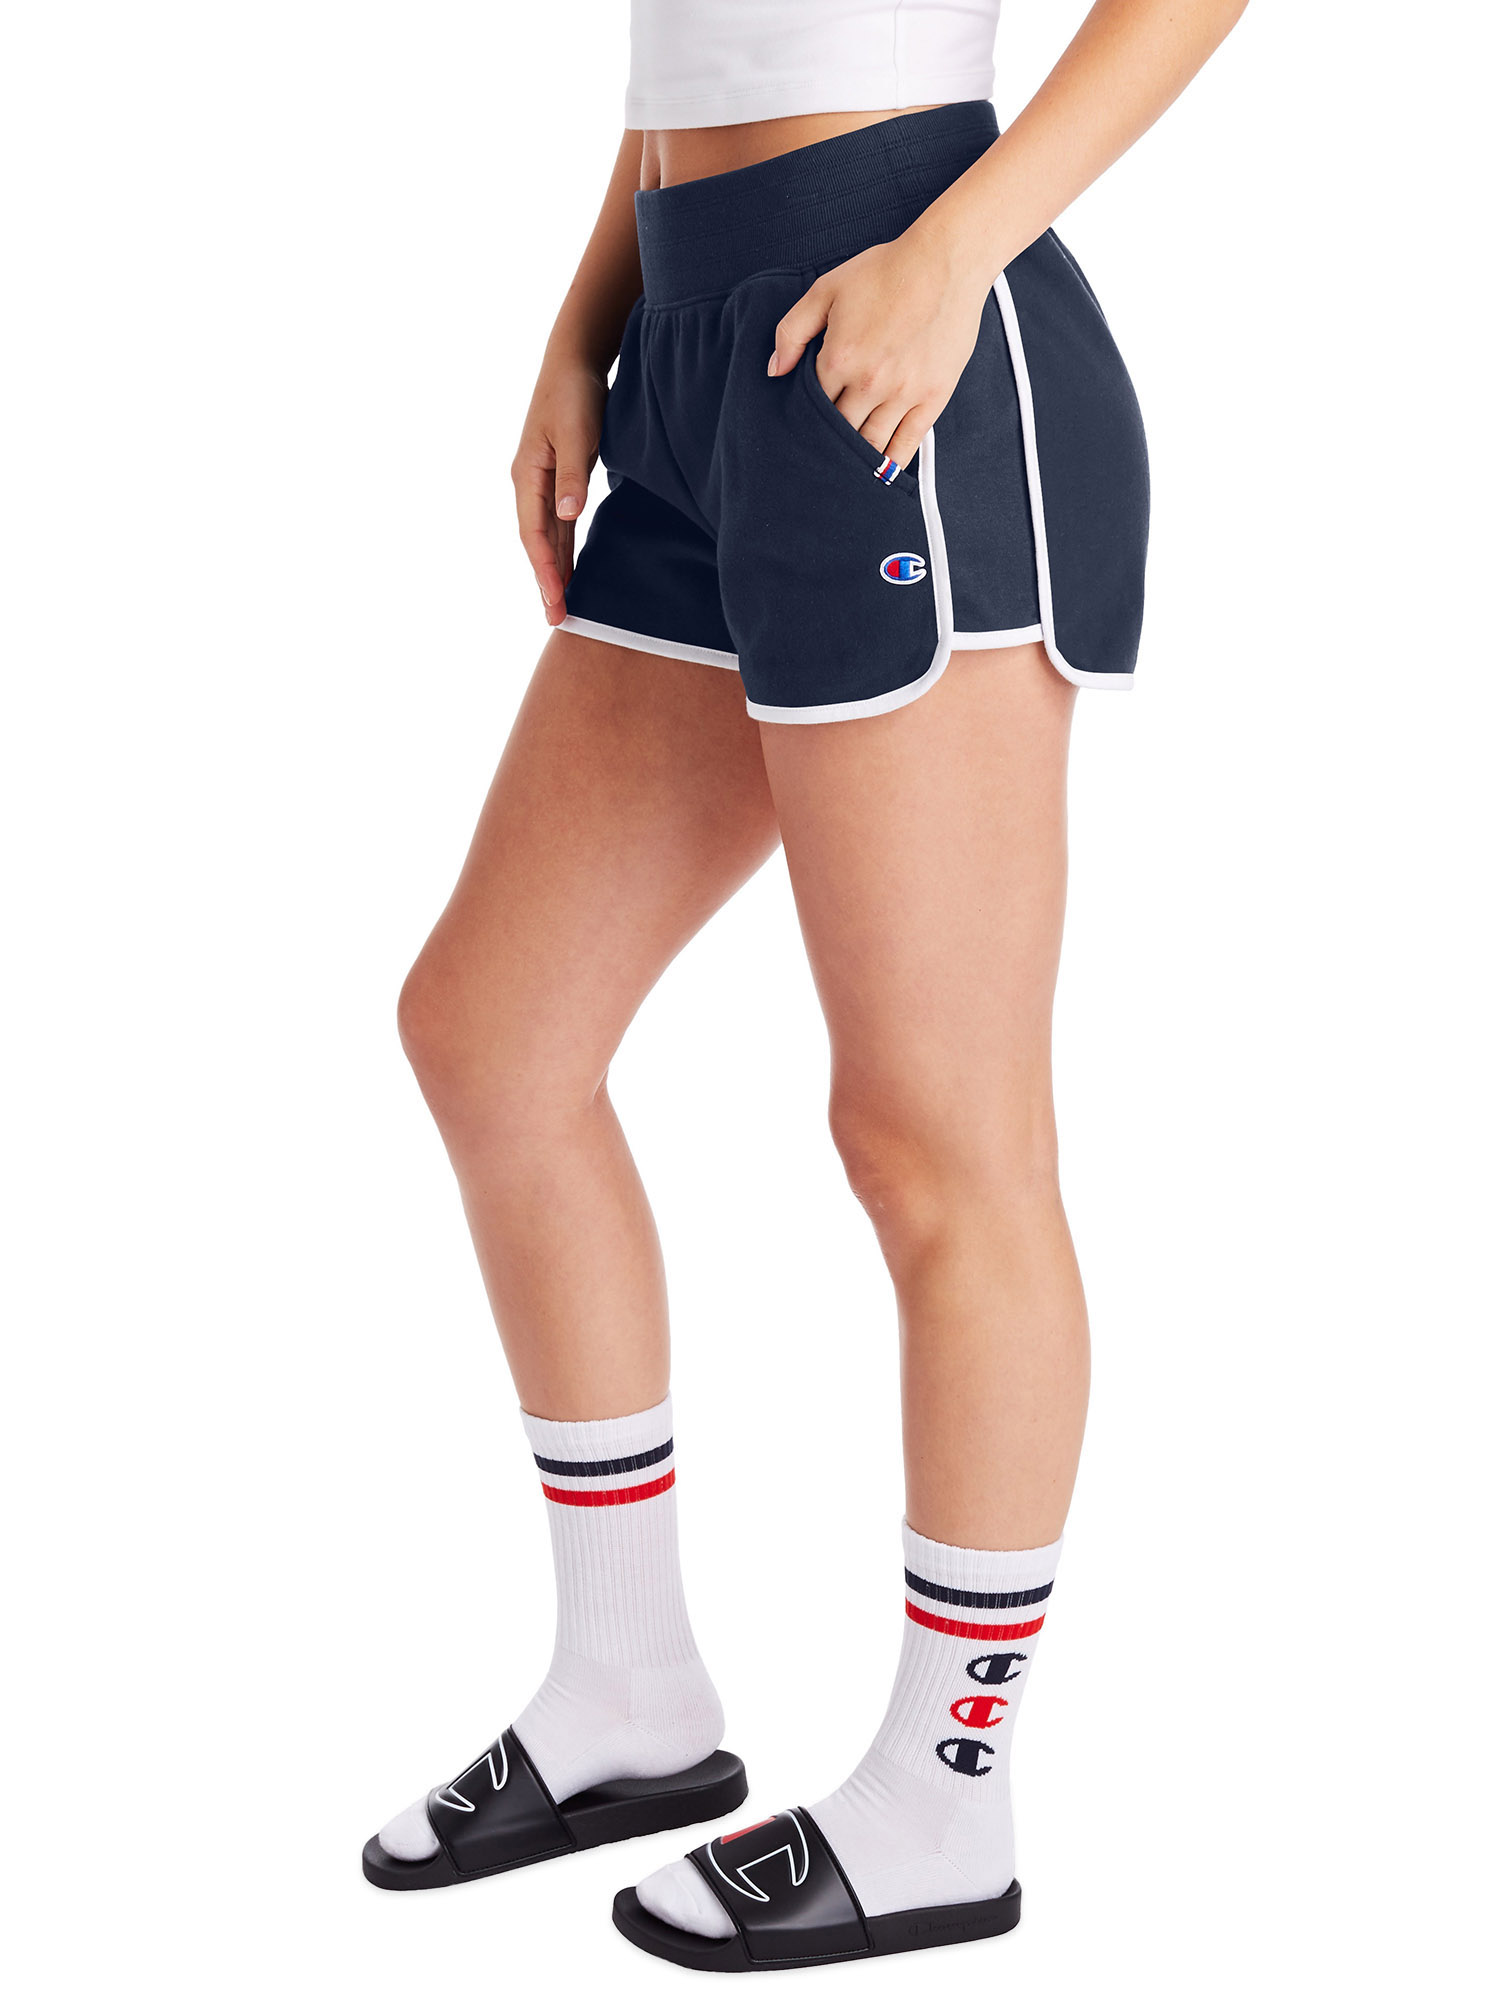 Champion Women's Campus French Terry Short - image 4 of 5